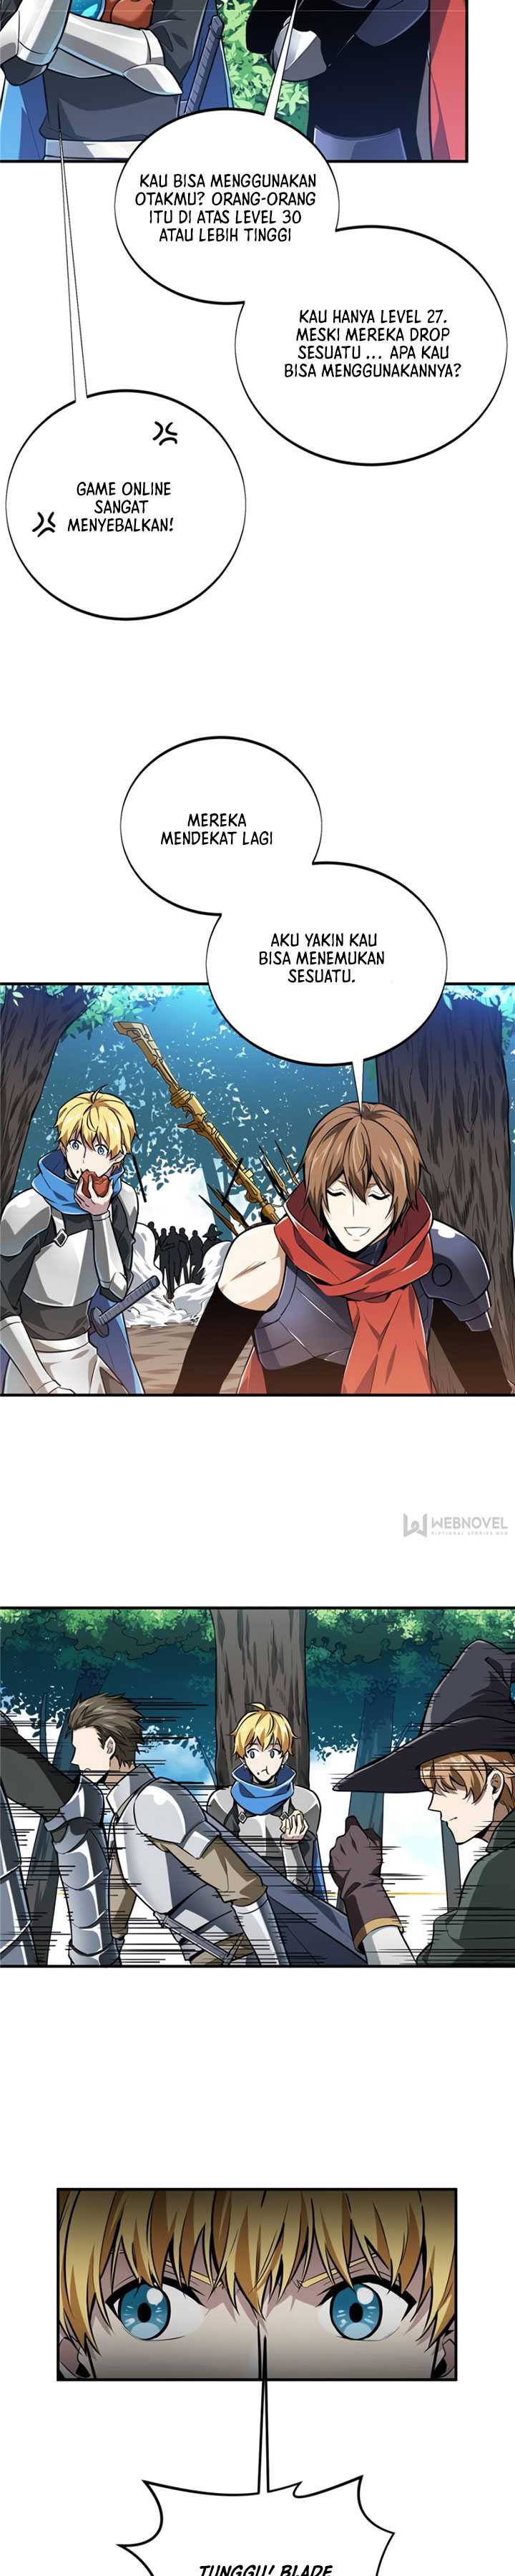 The King’s Avatar Chapter 89